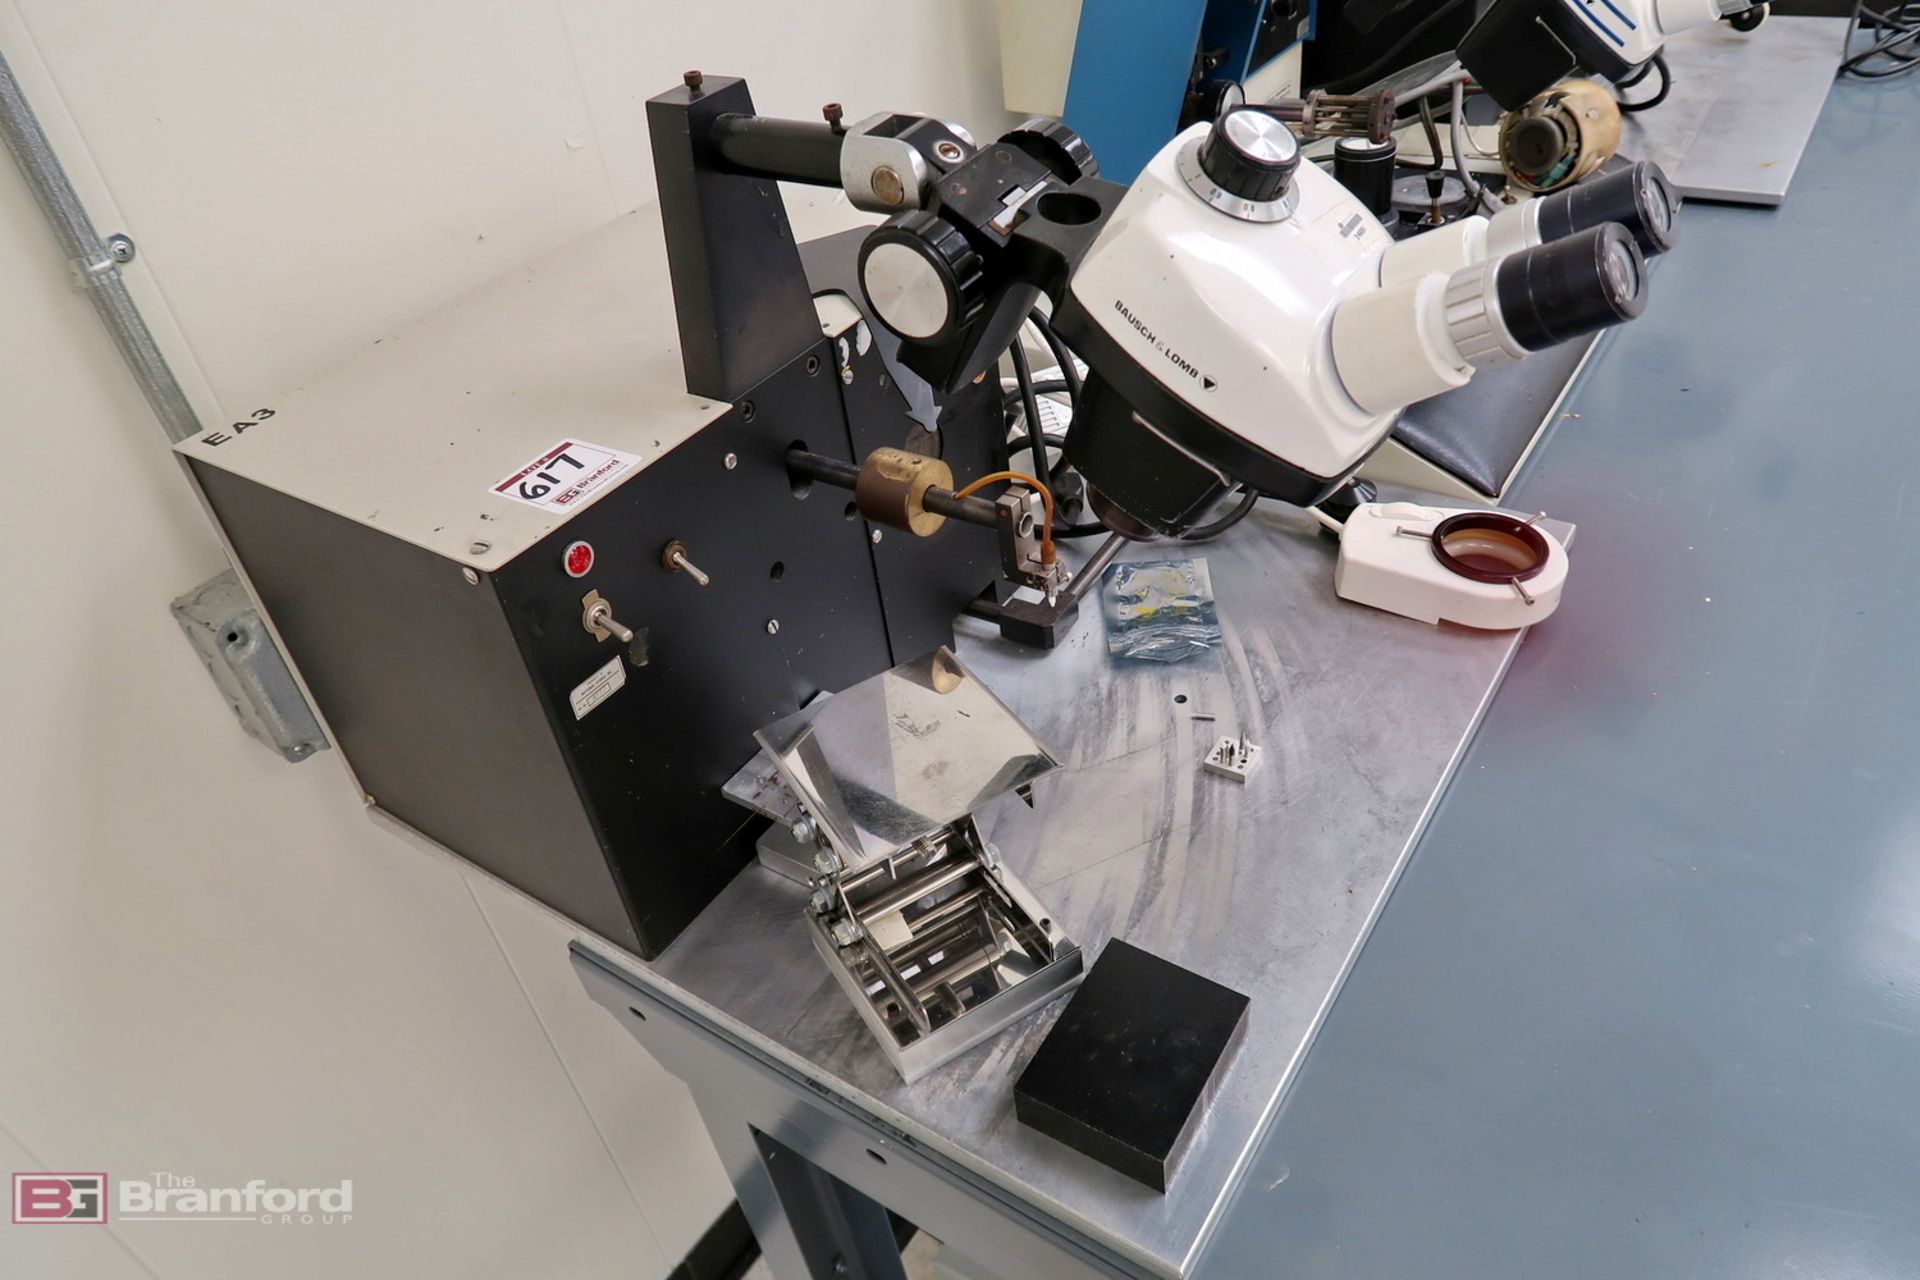 Wire Bonding System w/ Bausch & Lomb stereozoom microscope - Image 2 of 4